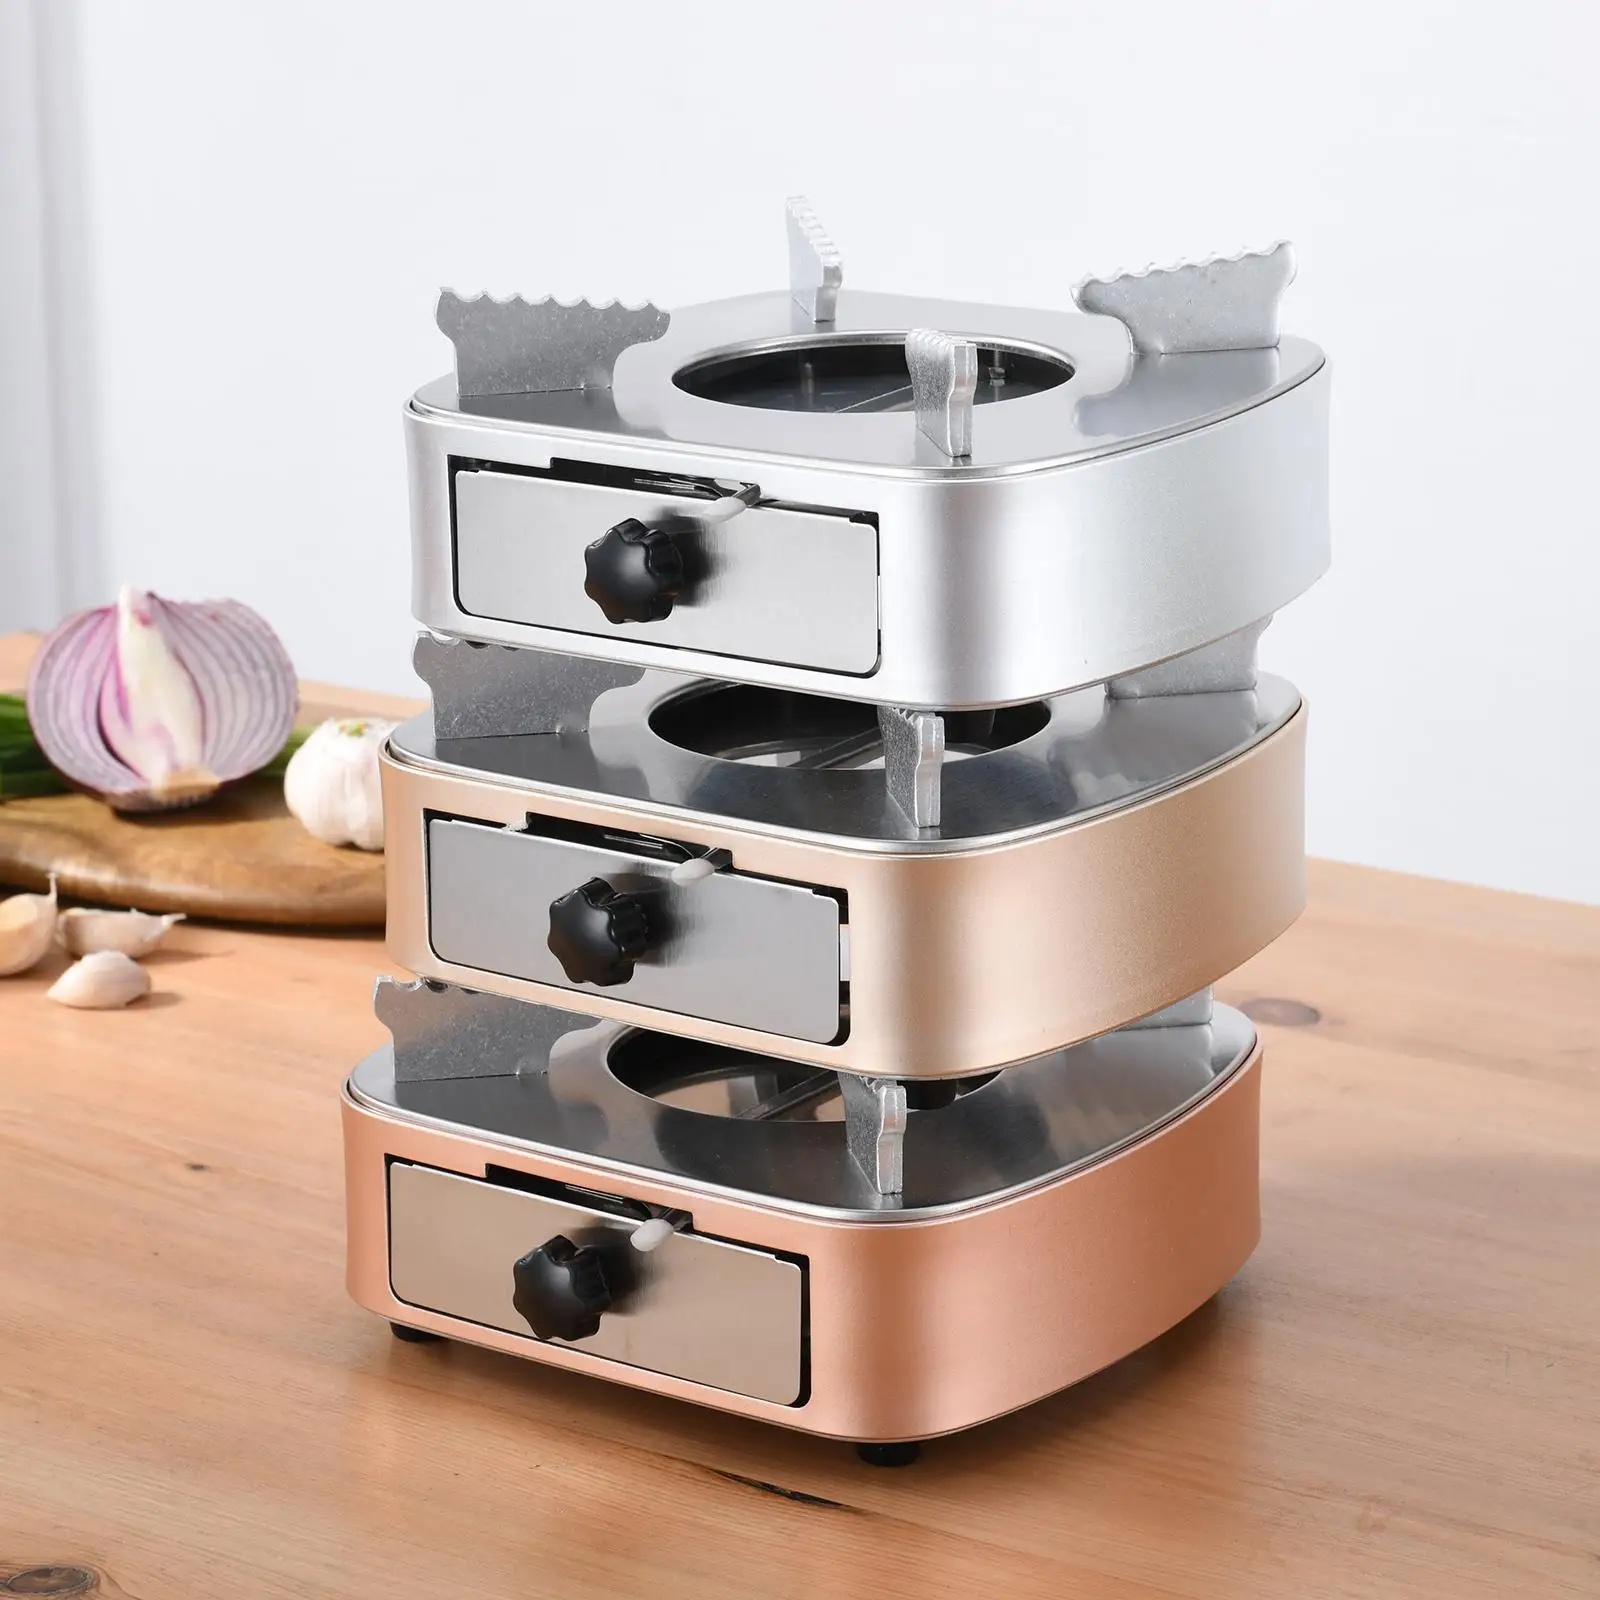 Mini Alcohol Stove Aluminum Alloy Windproof Furnace For Picnic Camping Backpackers Grills Burner Rug Bench Alcohol Camp Stove